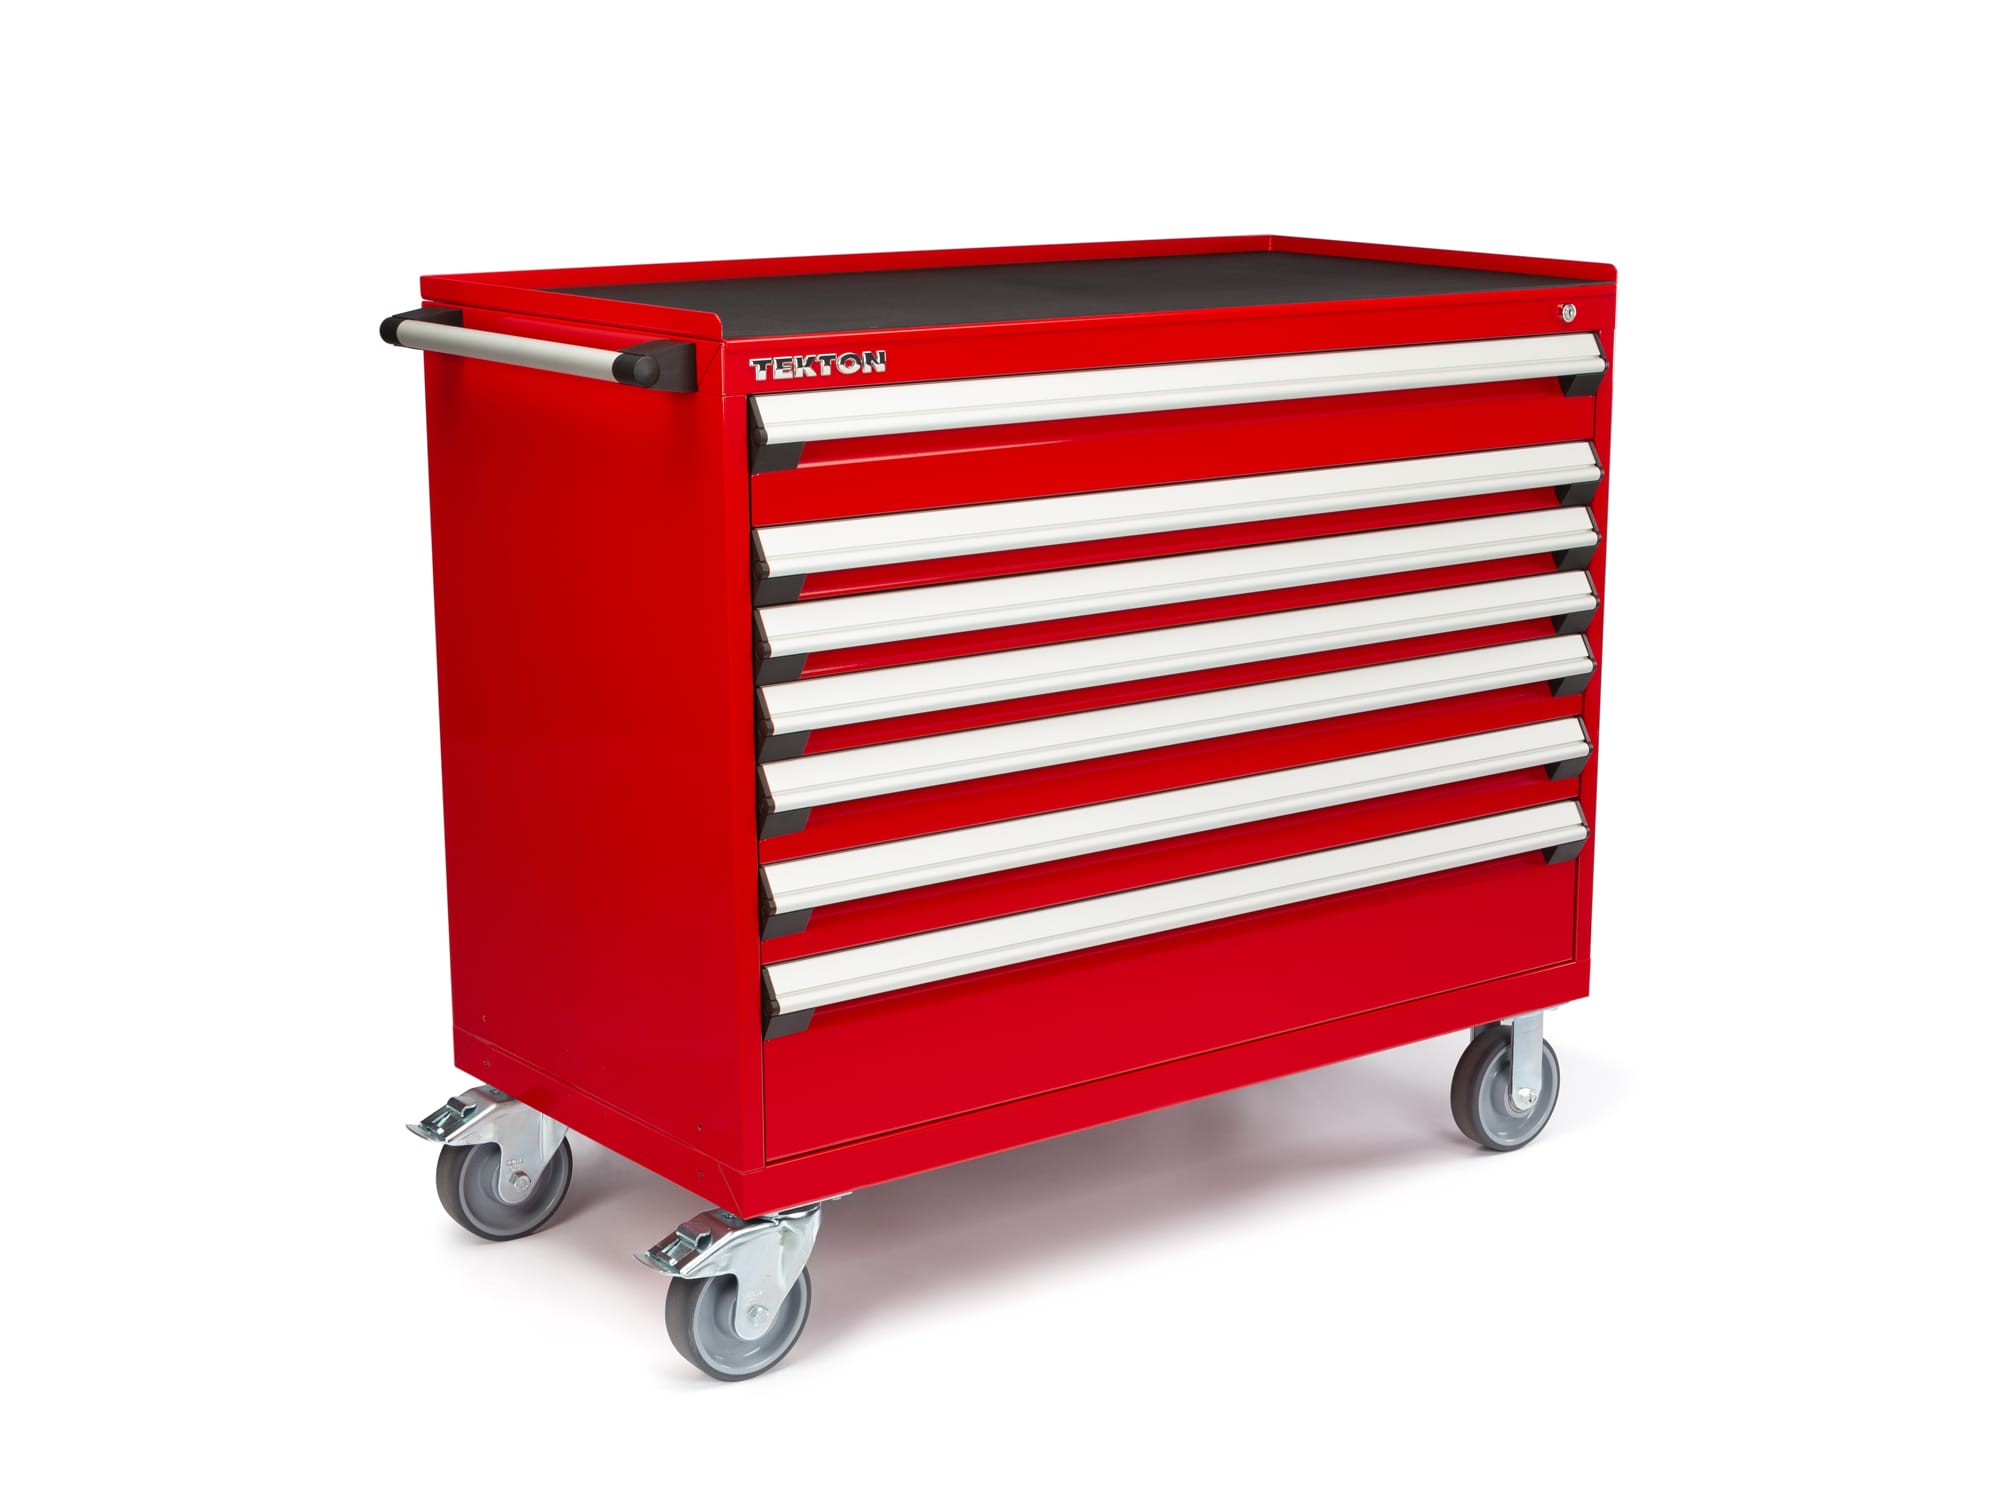 48 x 24 Inch Tool Cabinet (Red)